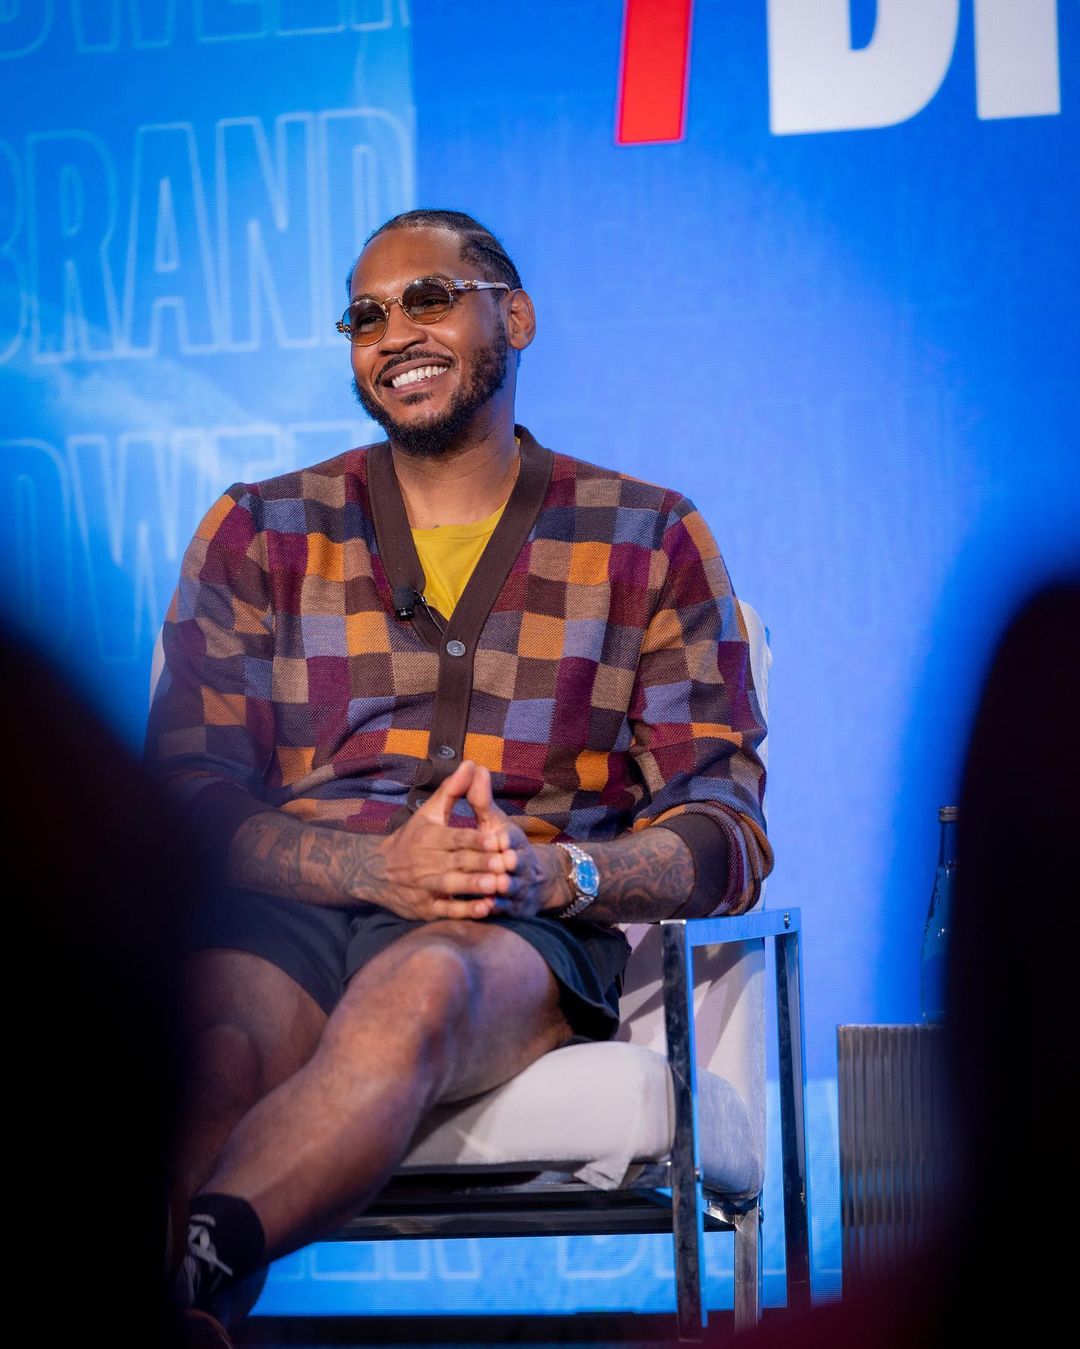 'How meaningful to play basketball' - Carmelo Anthony’s message to lovers